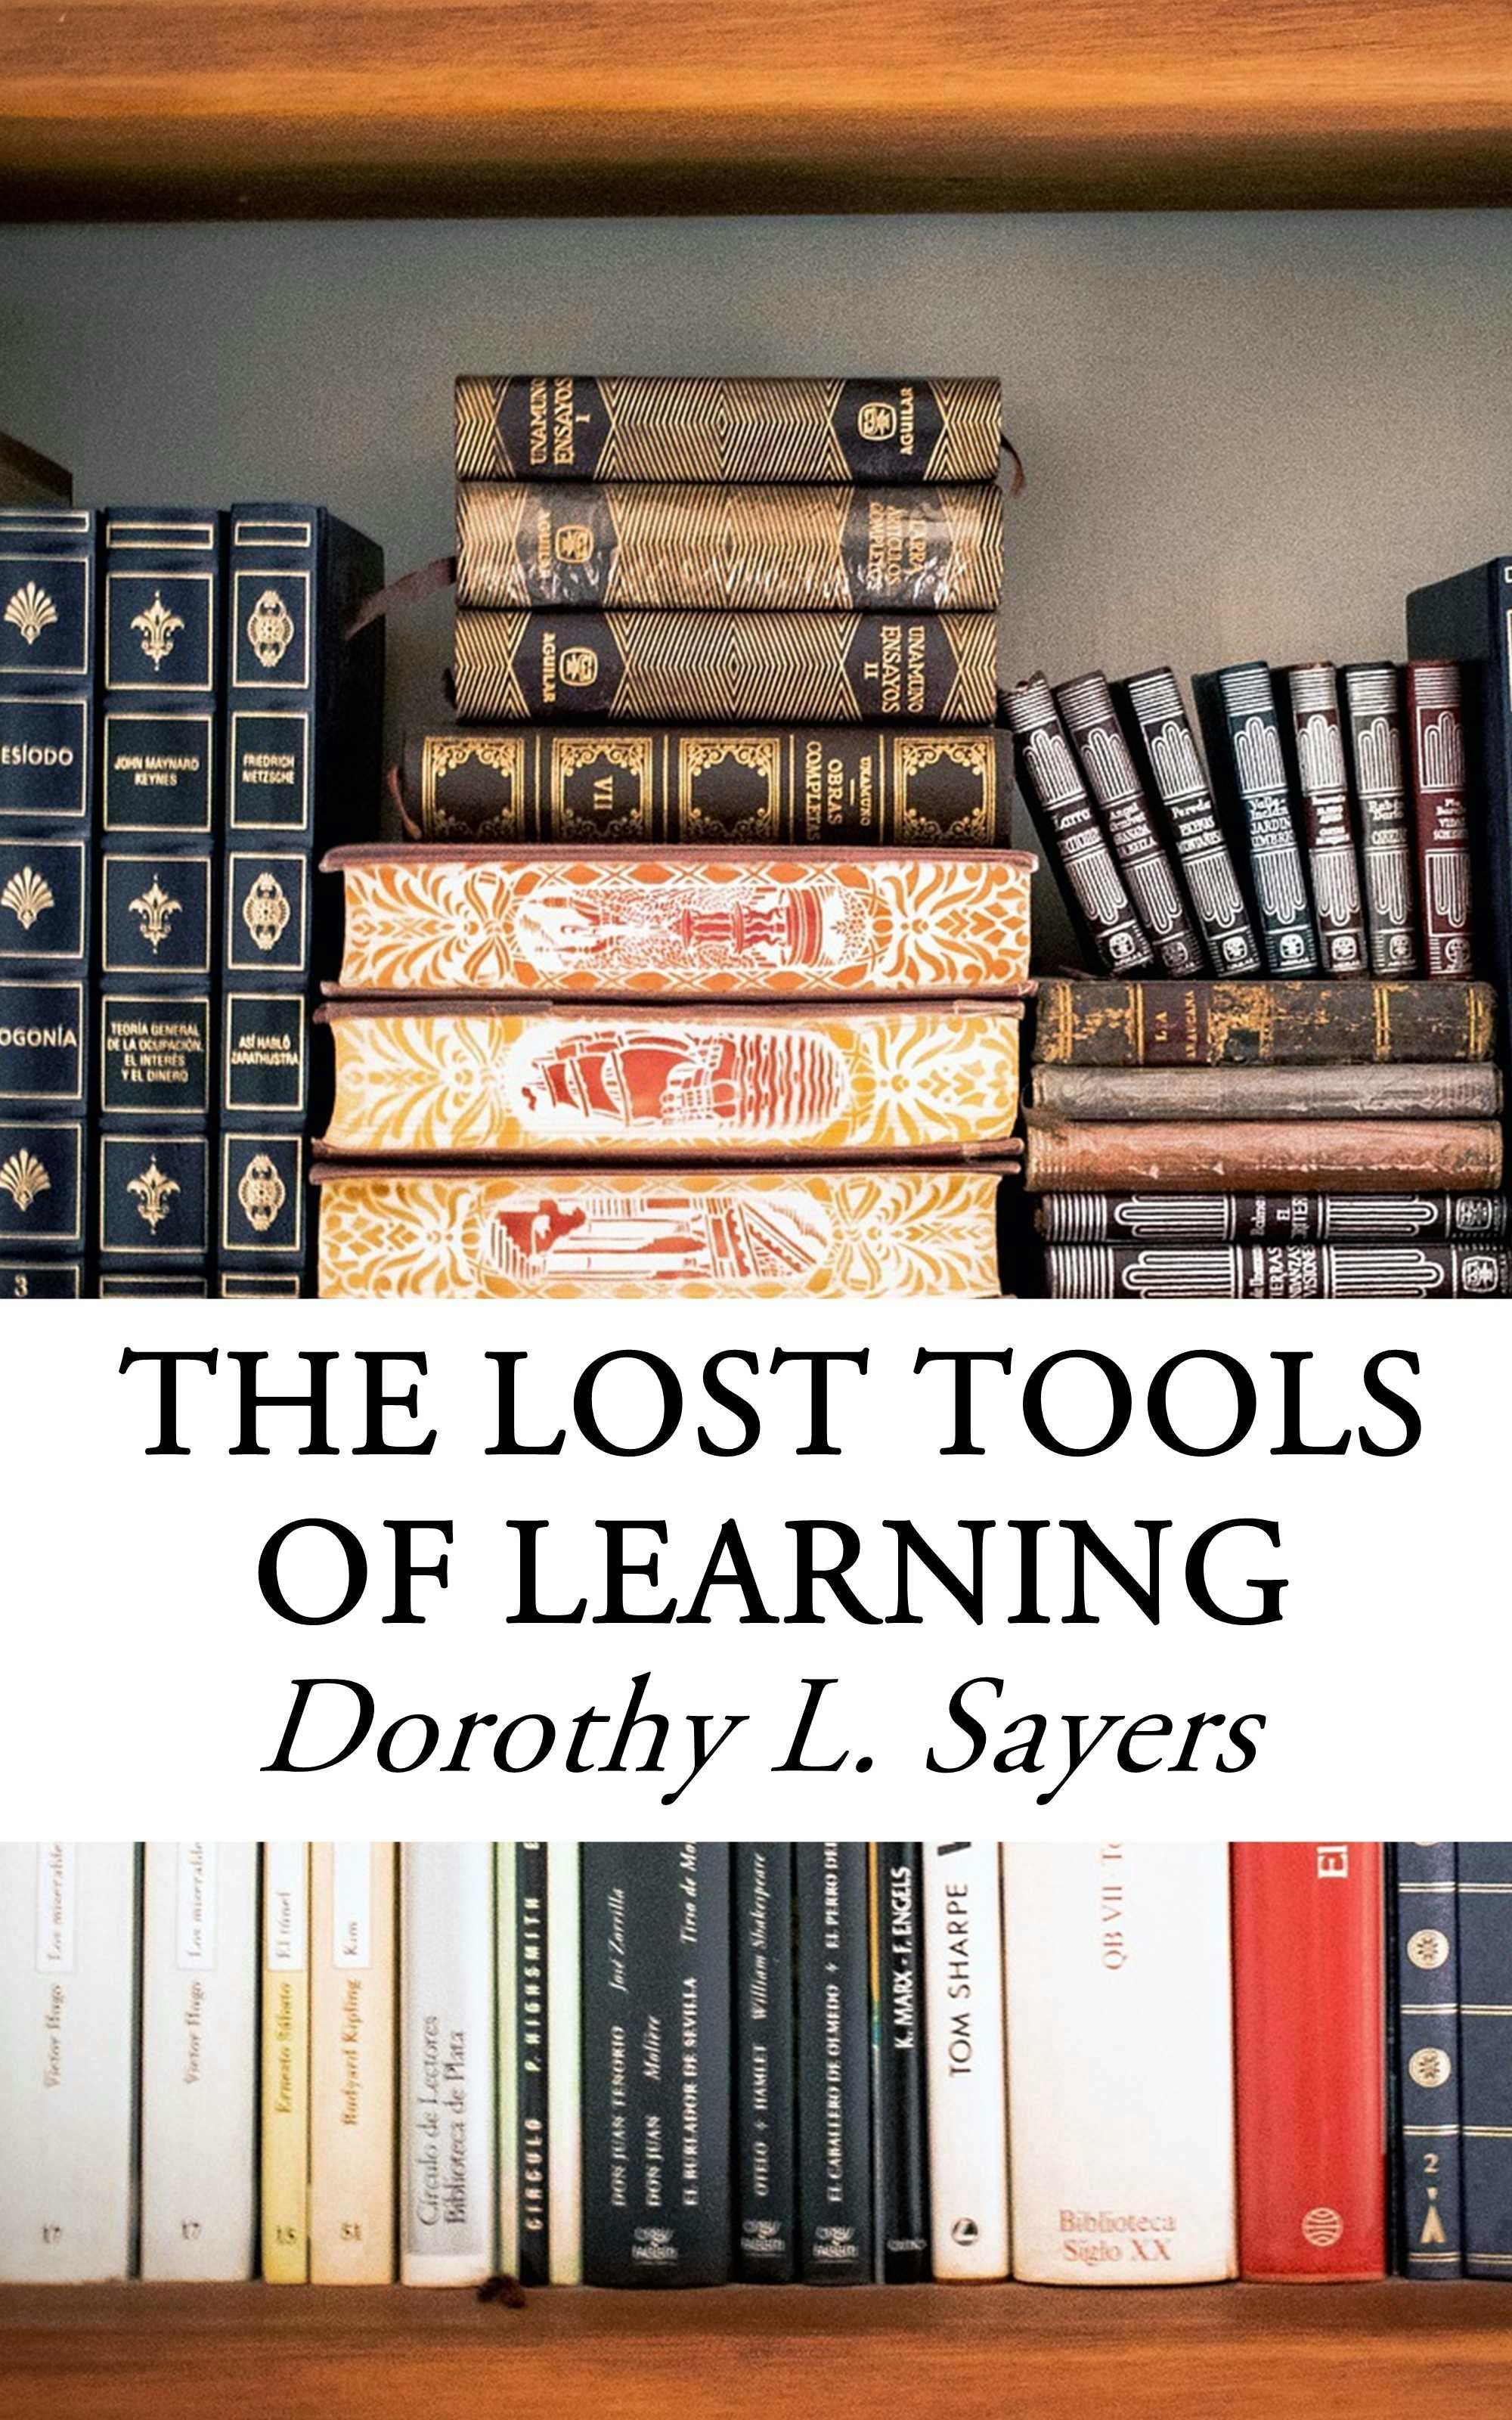 The Lost Tools of Learning - Dorothy L. Sayers